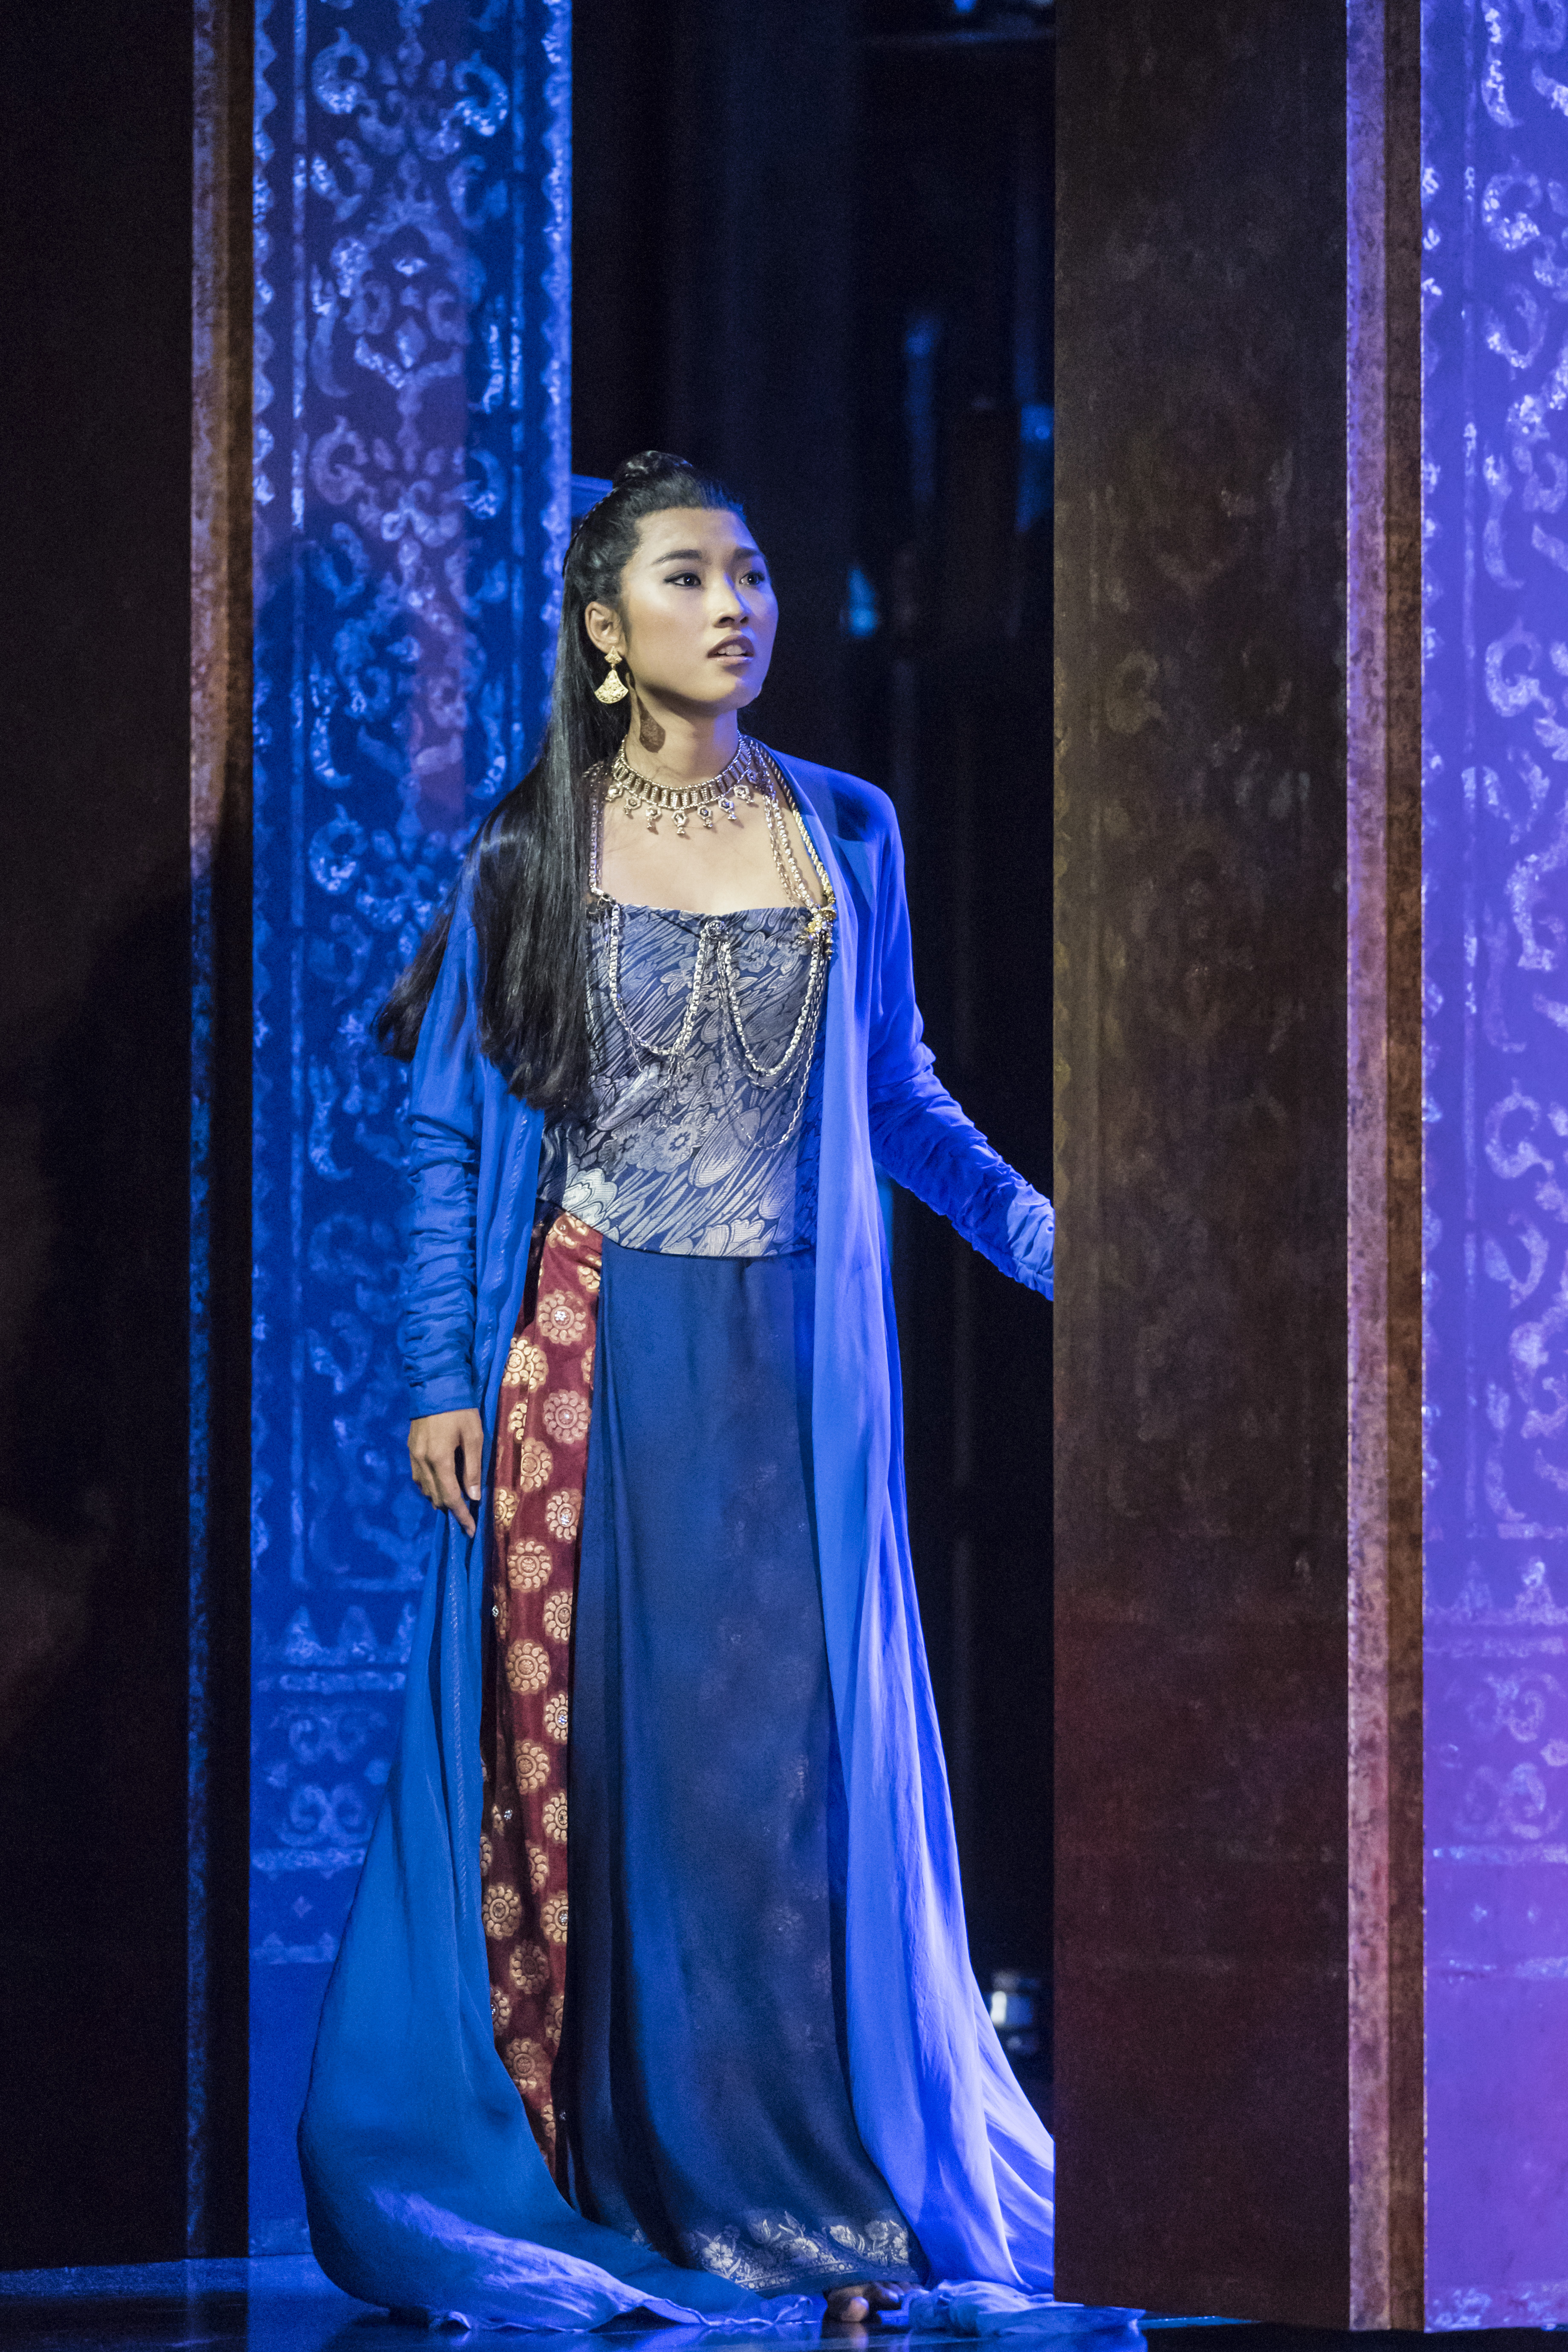 The King and I Wales Millennium Centre UK Tour 